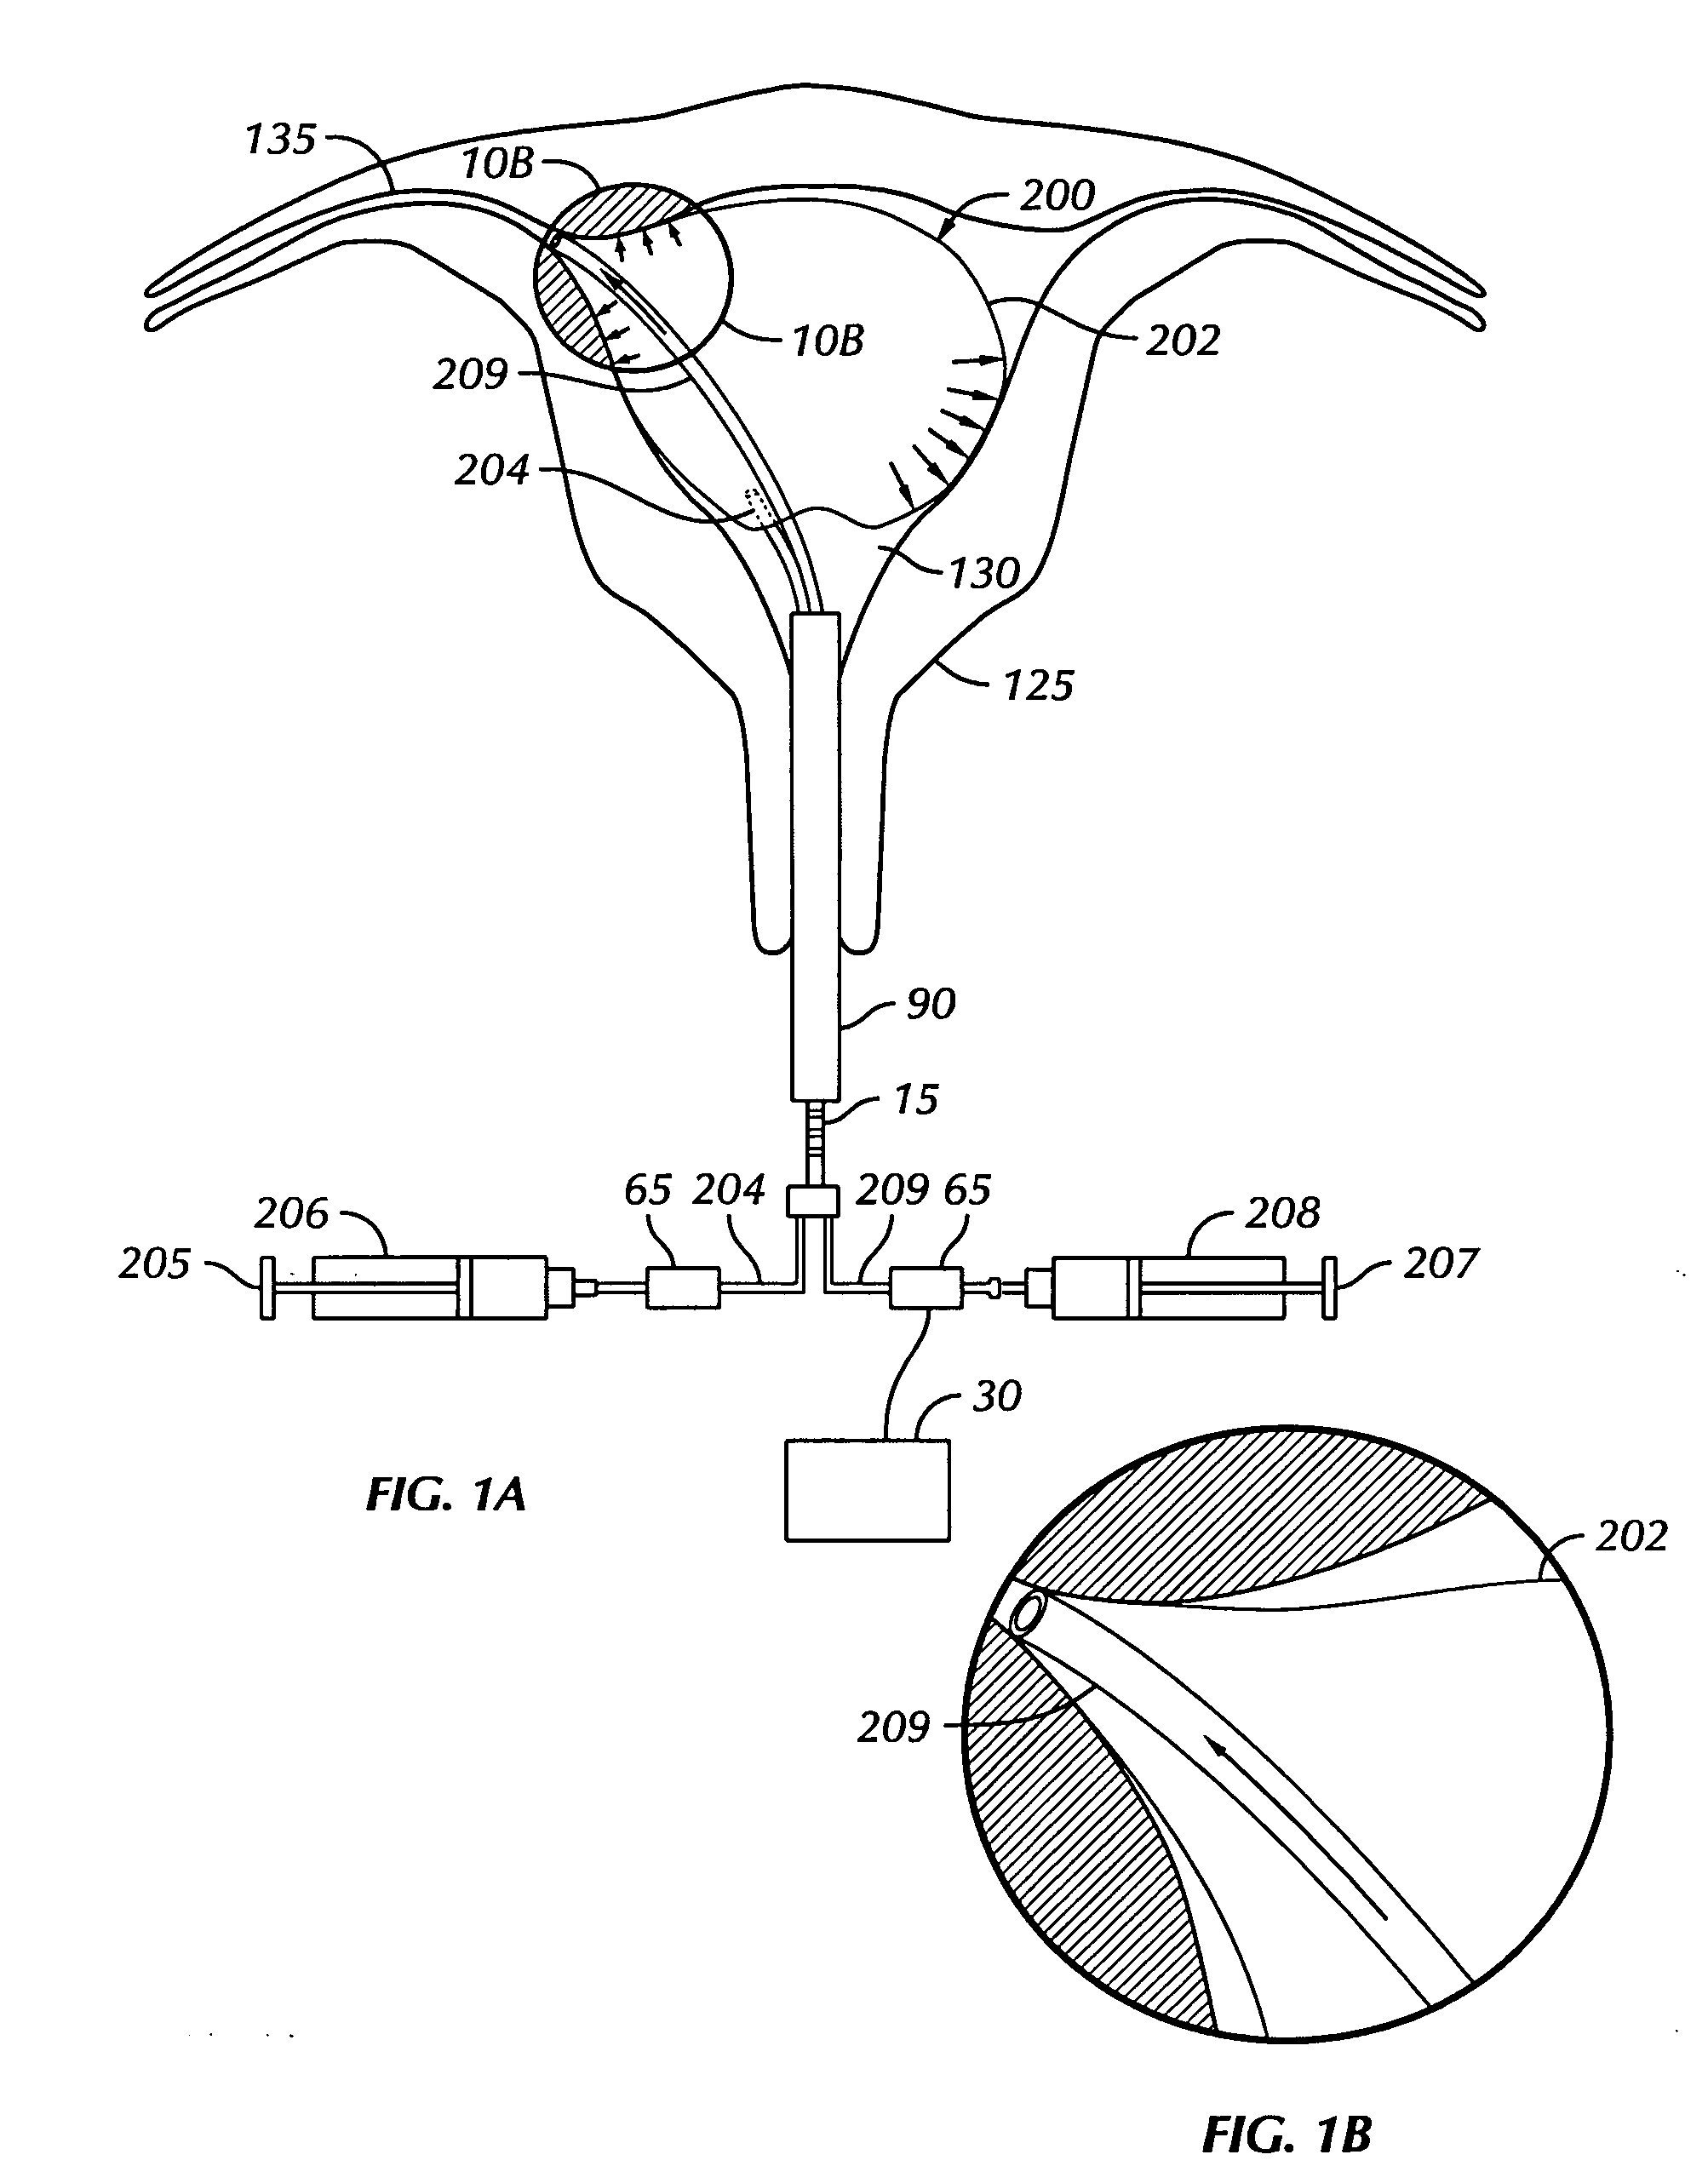 Apparatus and method for selectably treating a fallopian tube